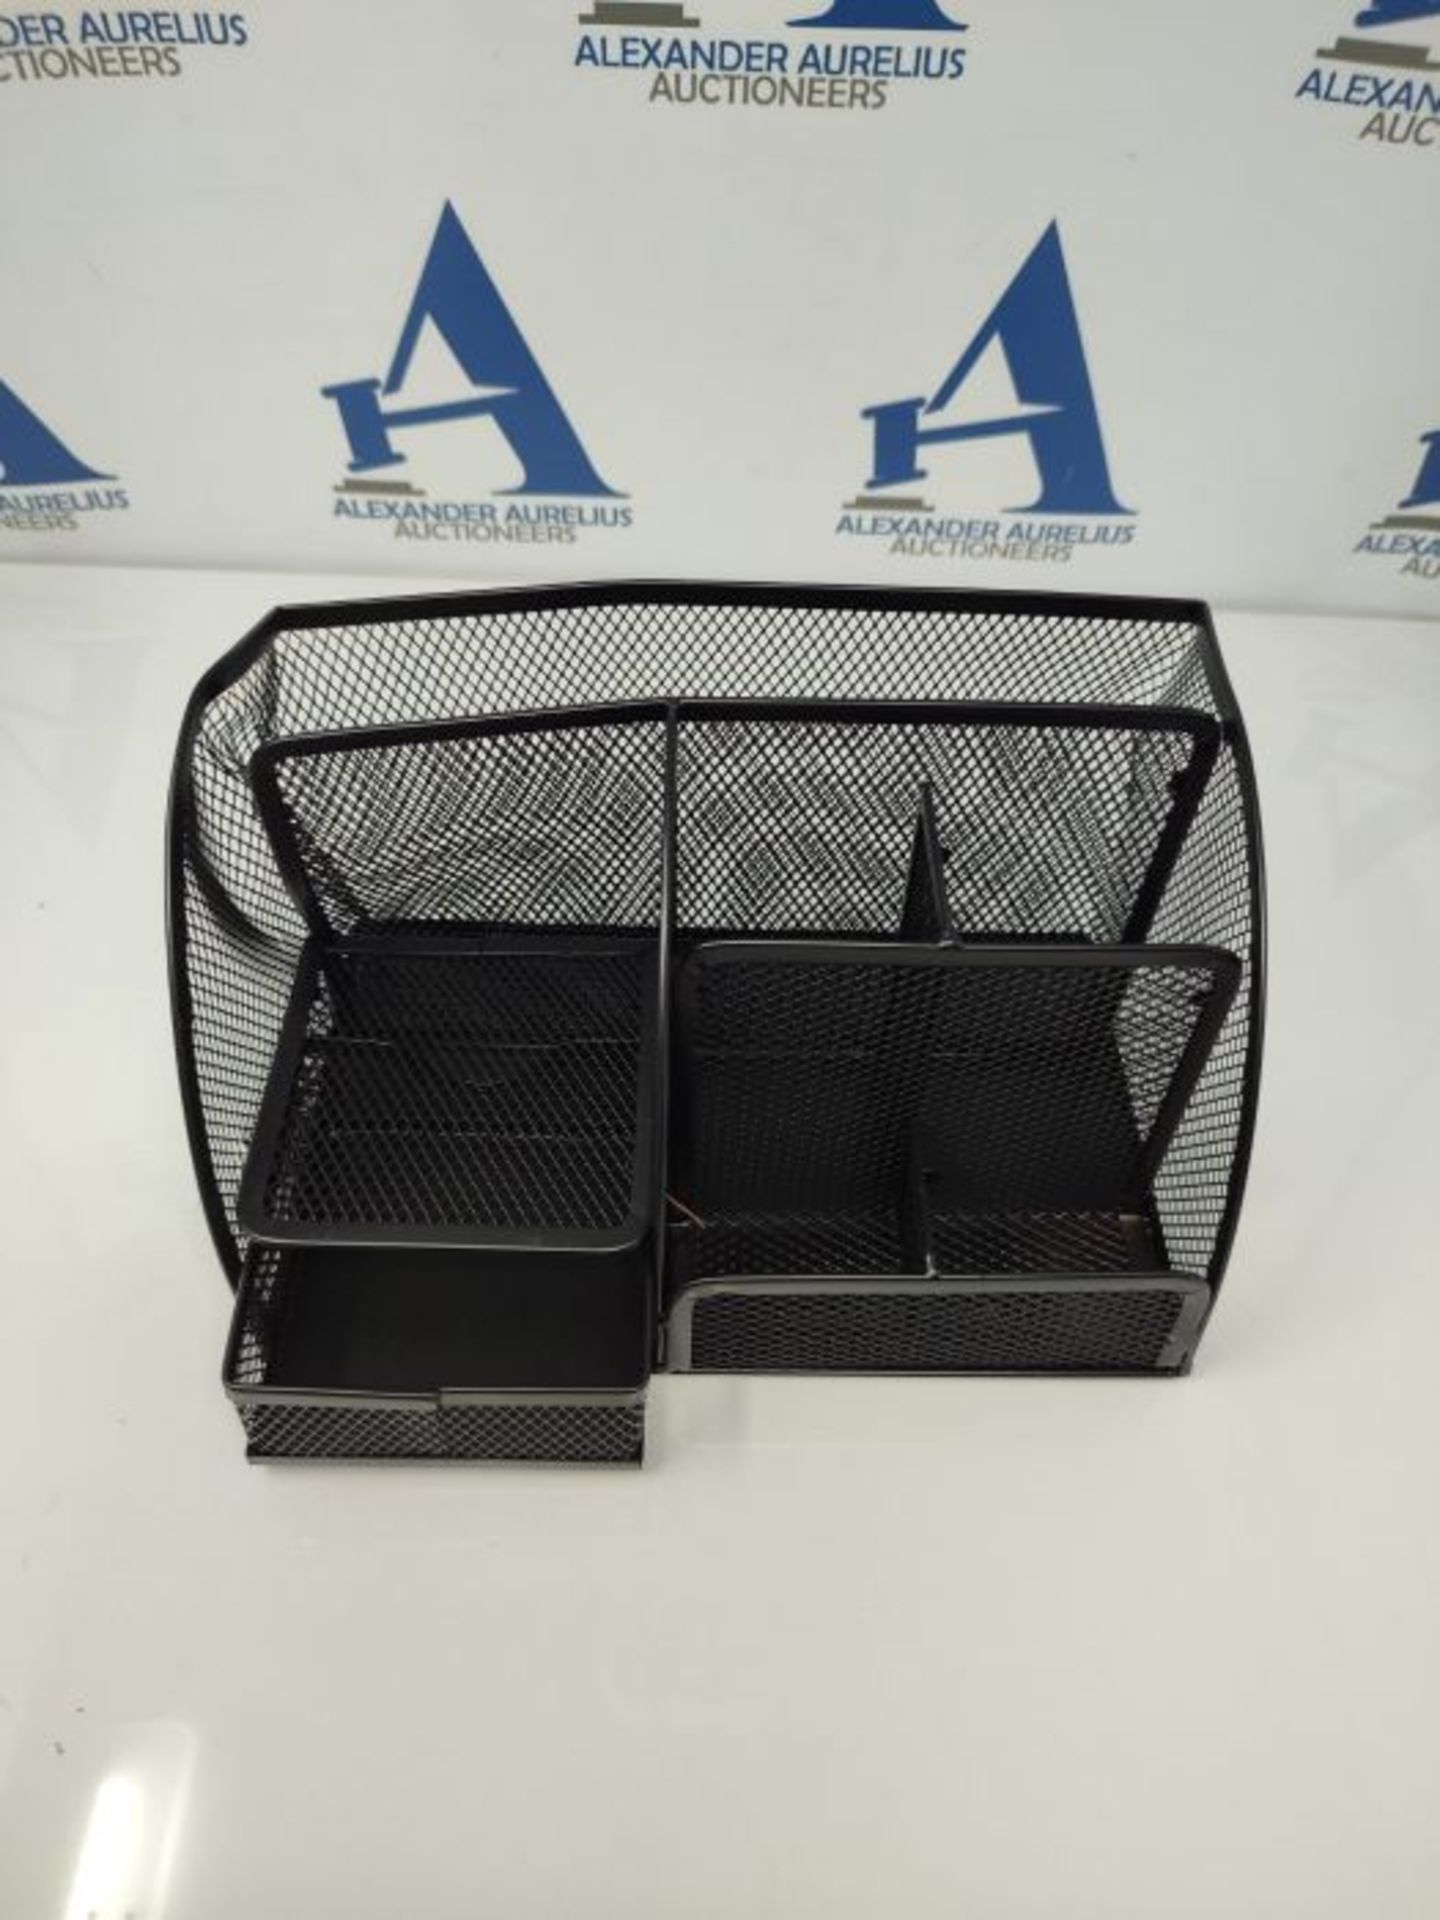 New Office Storage Simple Houseware Mesh Desk Organizer with Sliding Drawer, Five Slot - Image 2 of 3